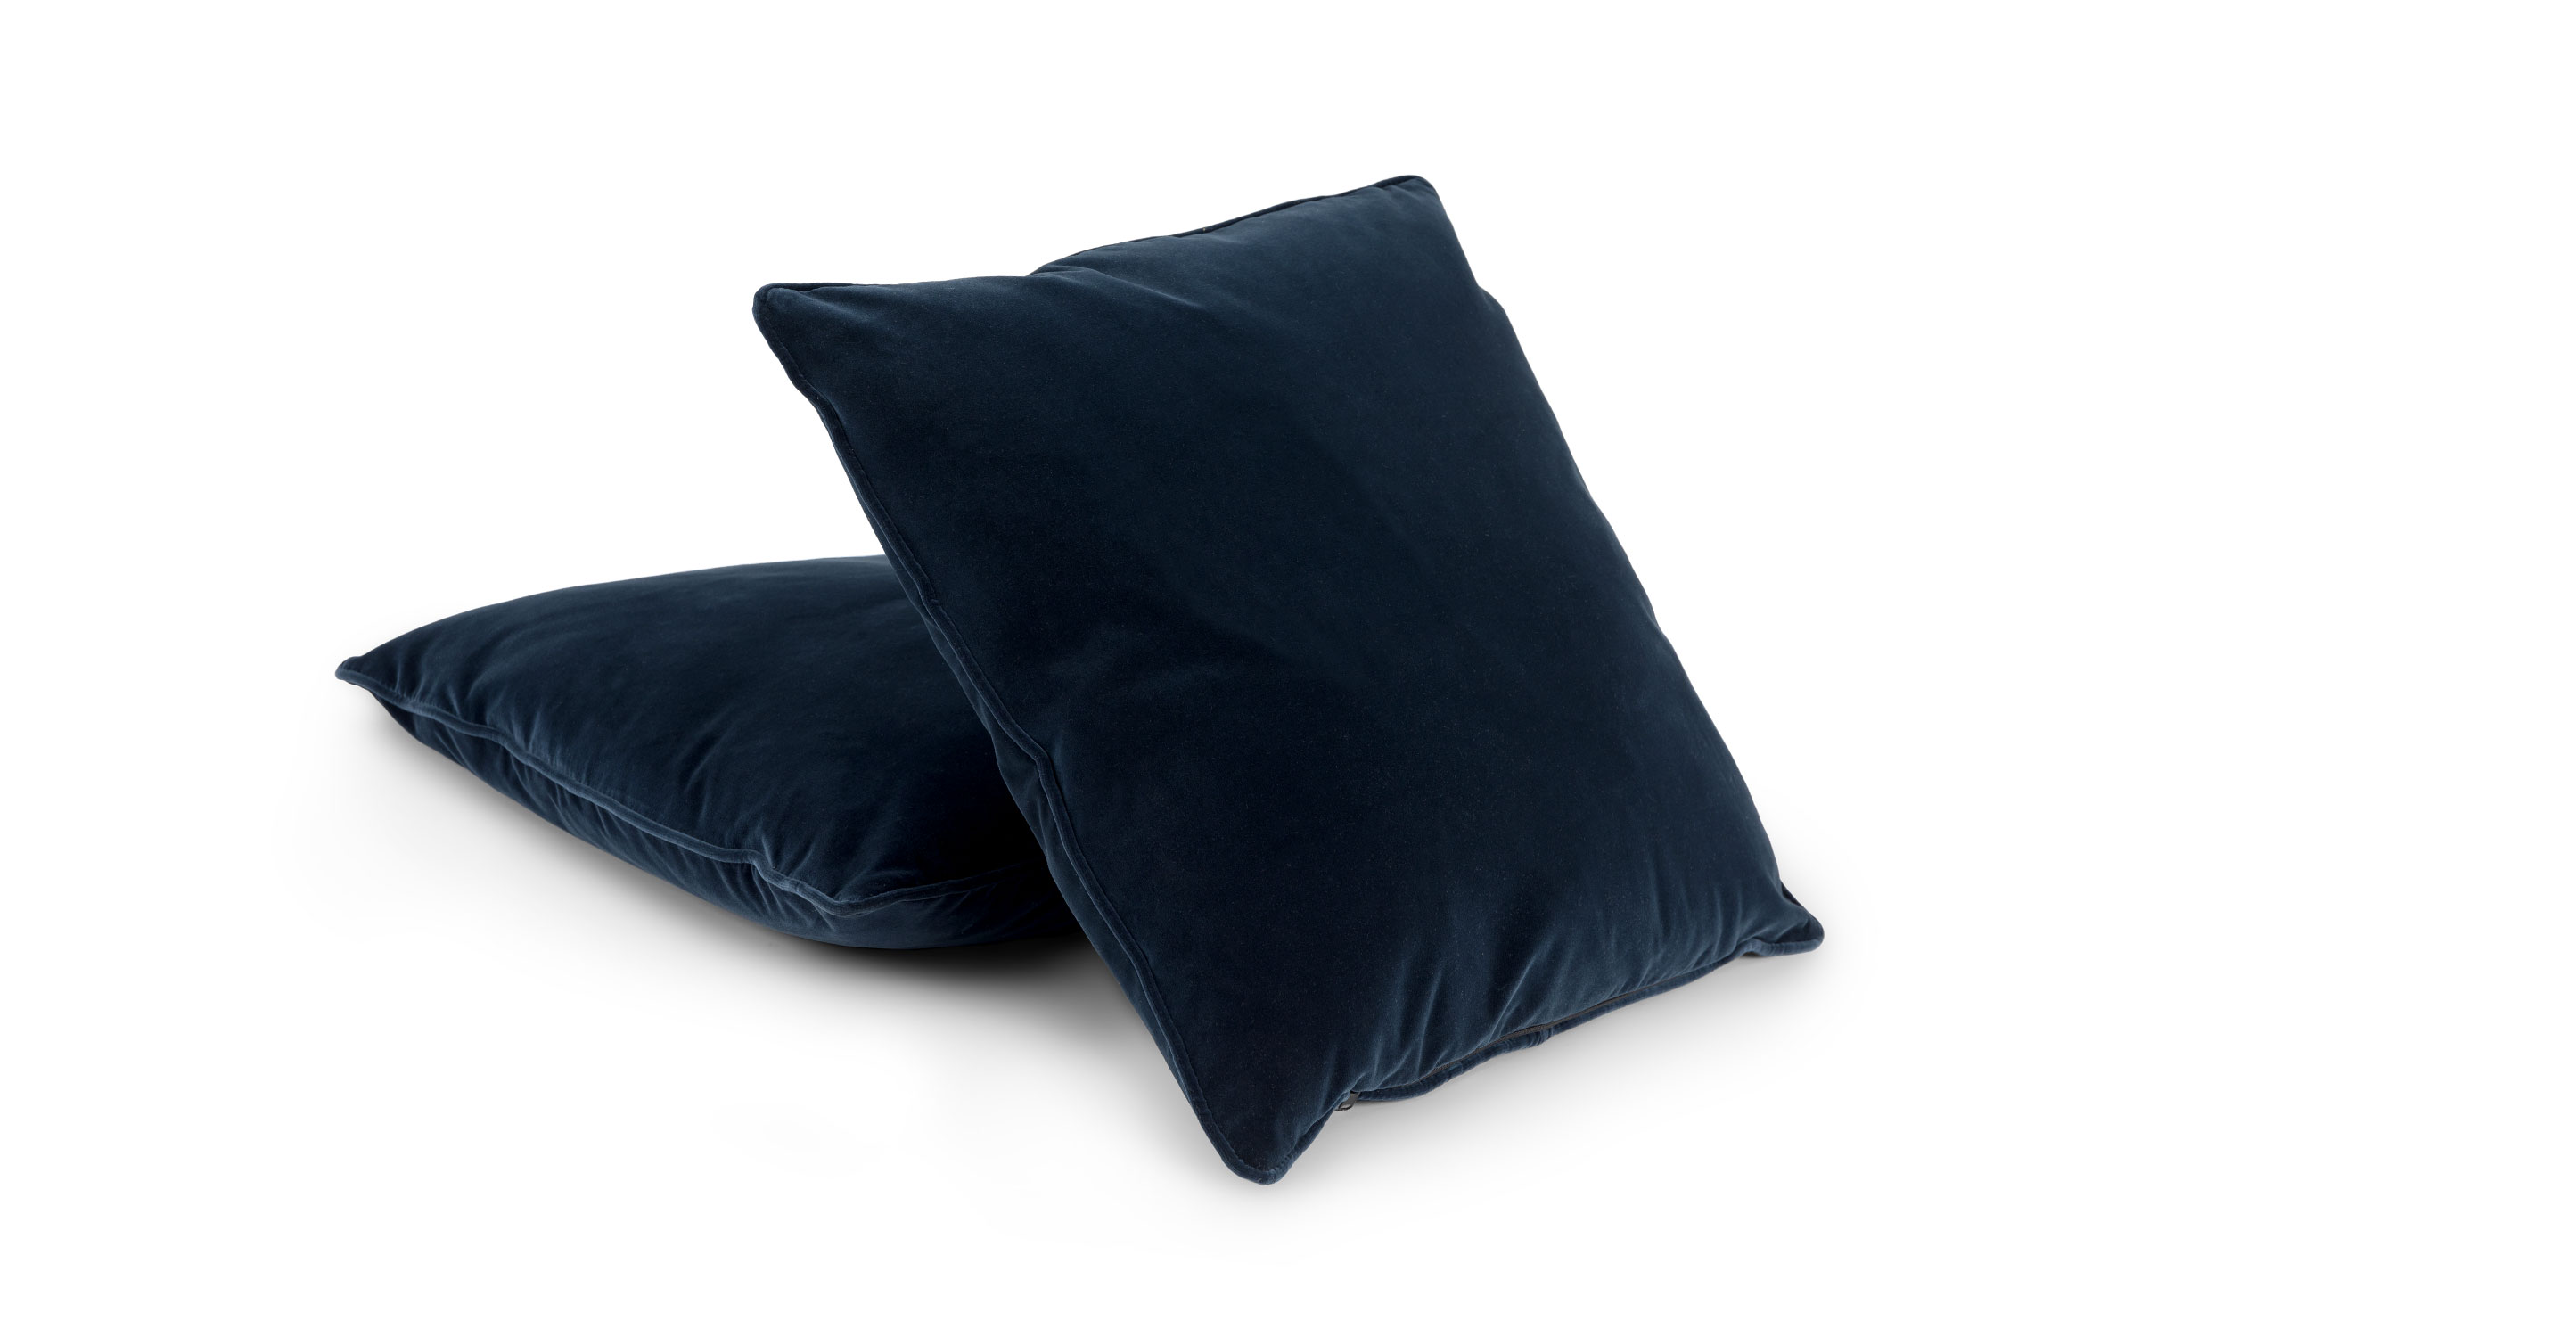 45 x 45 Cm Scatter Box Wilde Velour Piped Feather Filled Cushion